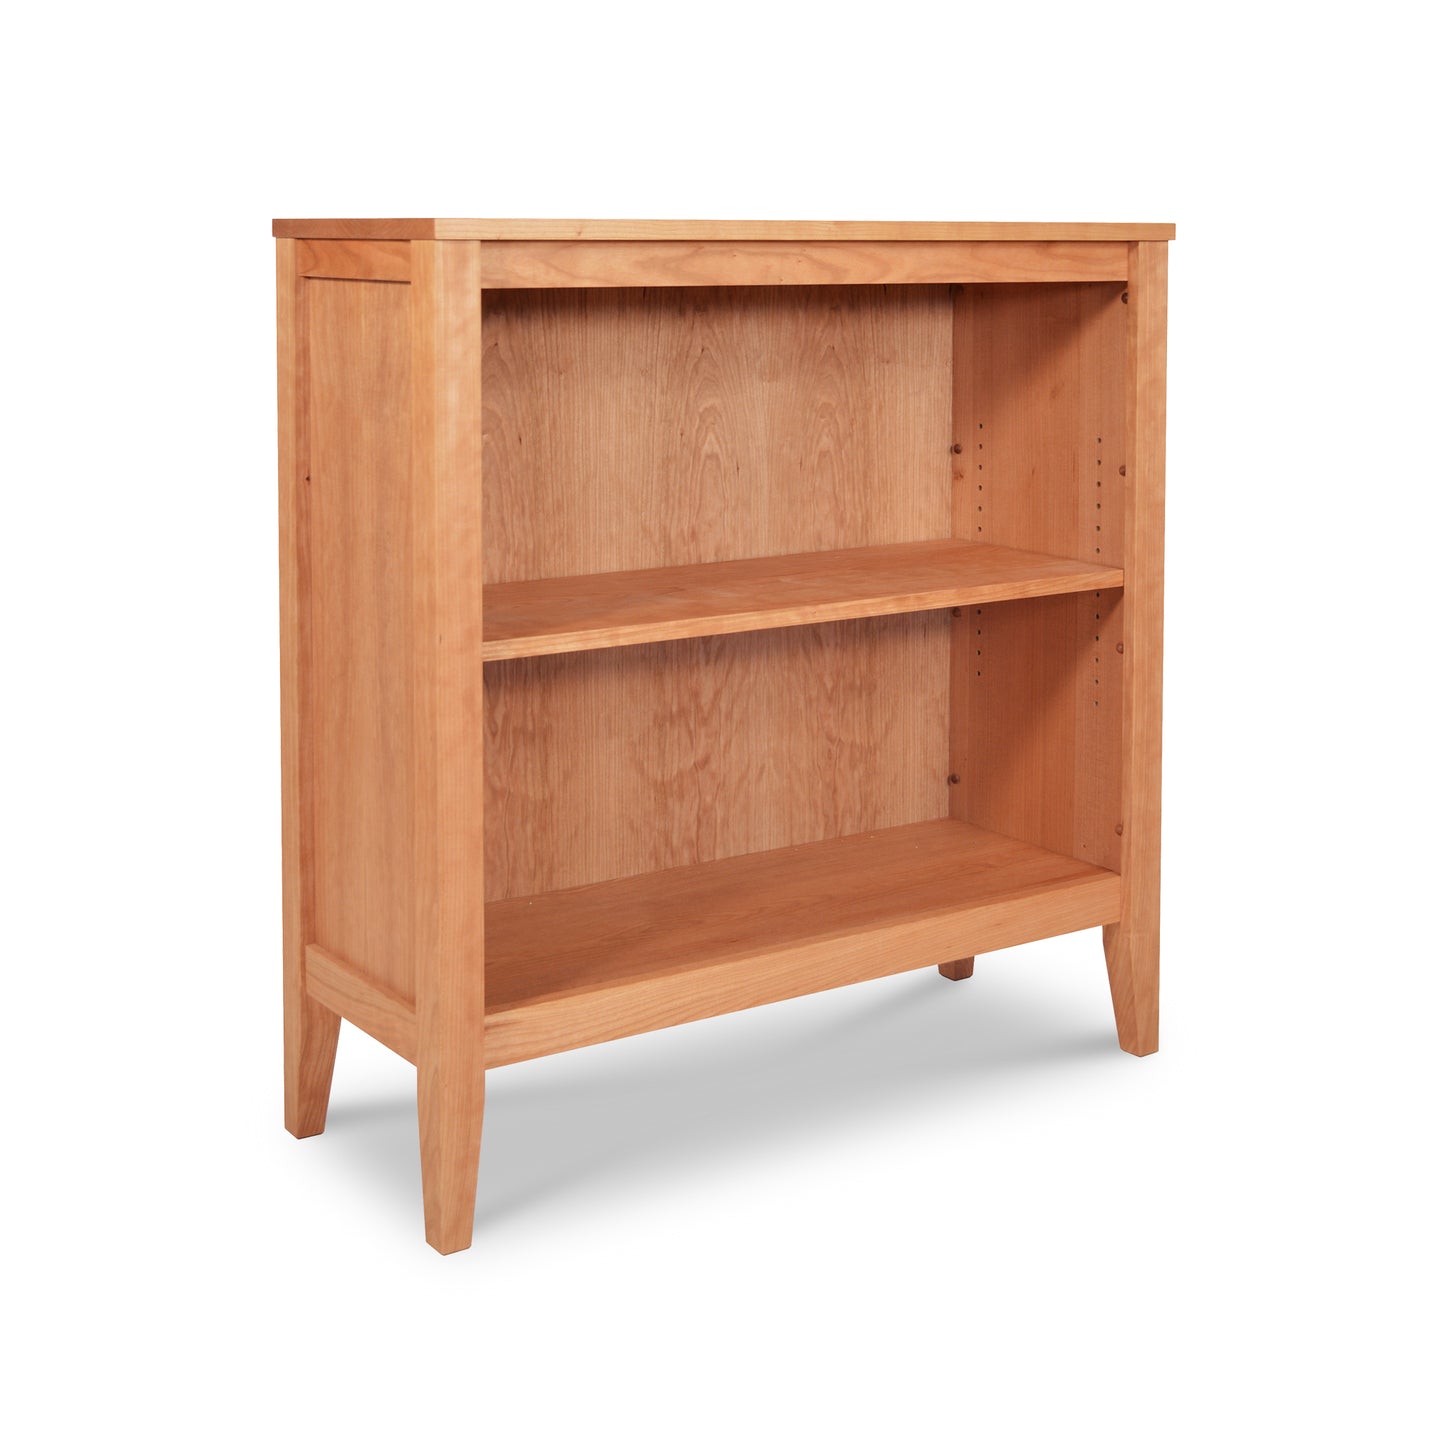 Andover Modern Bookcase by Maple Corner Woodworks, with two adjustable shelves, isolated on a white background.